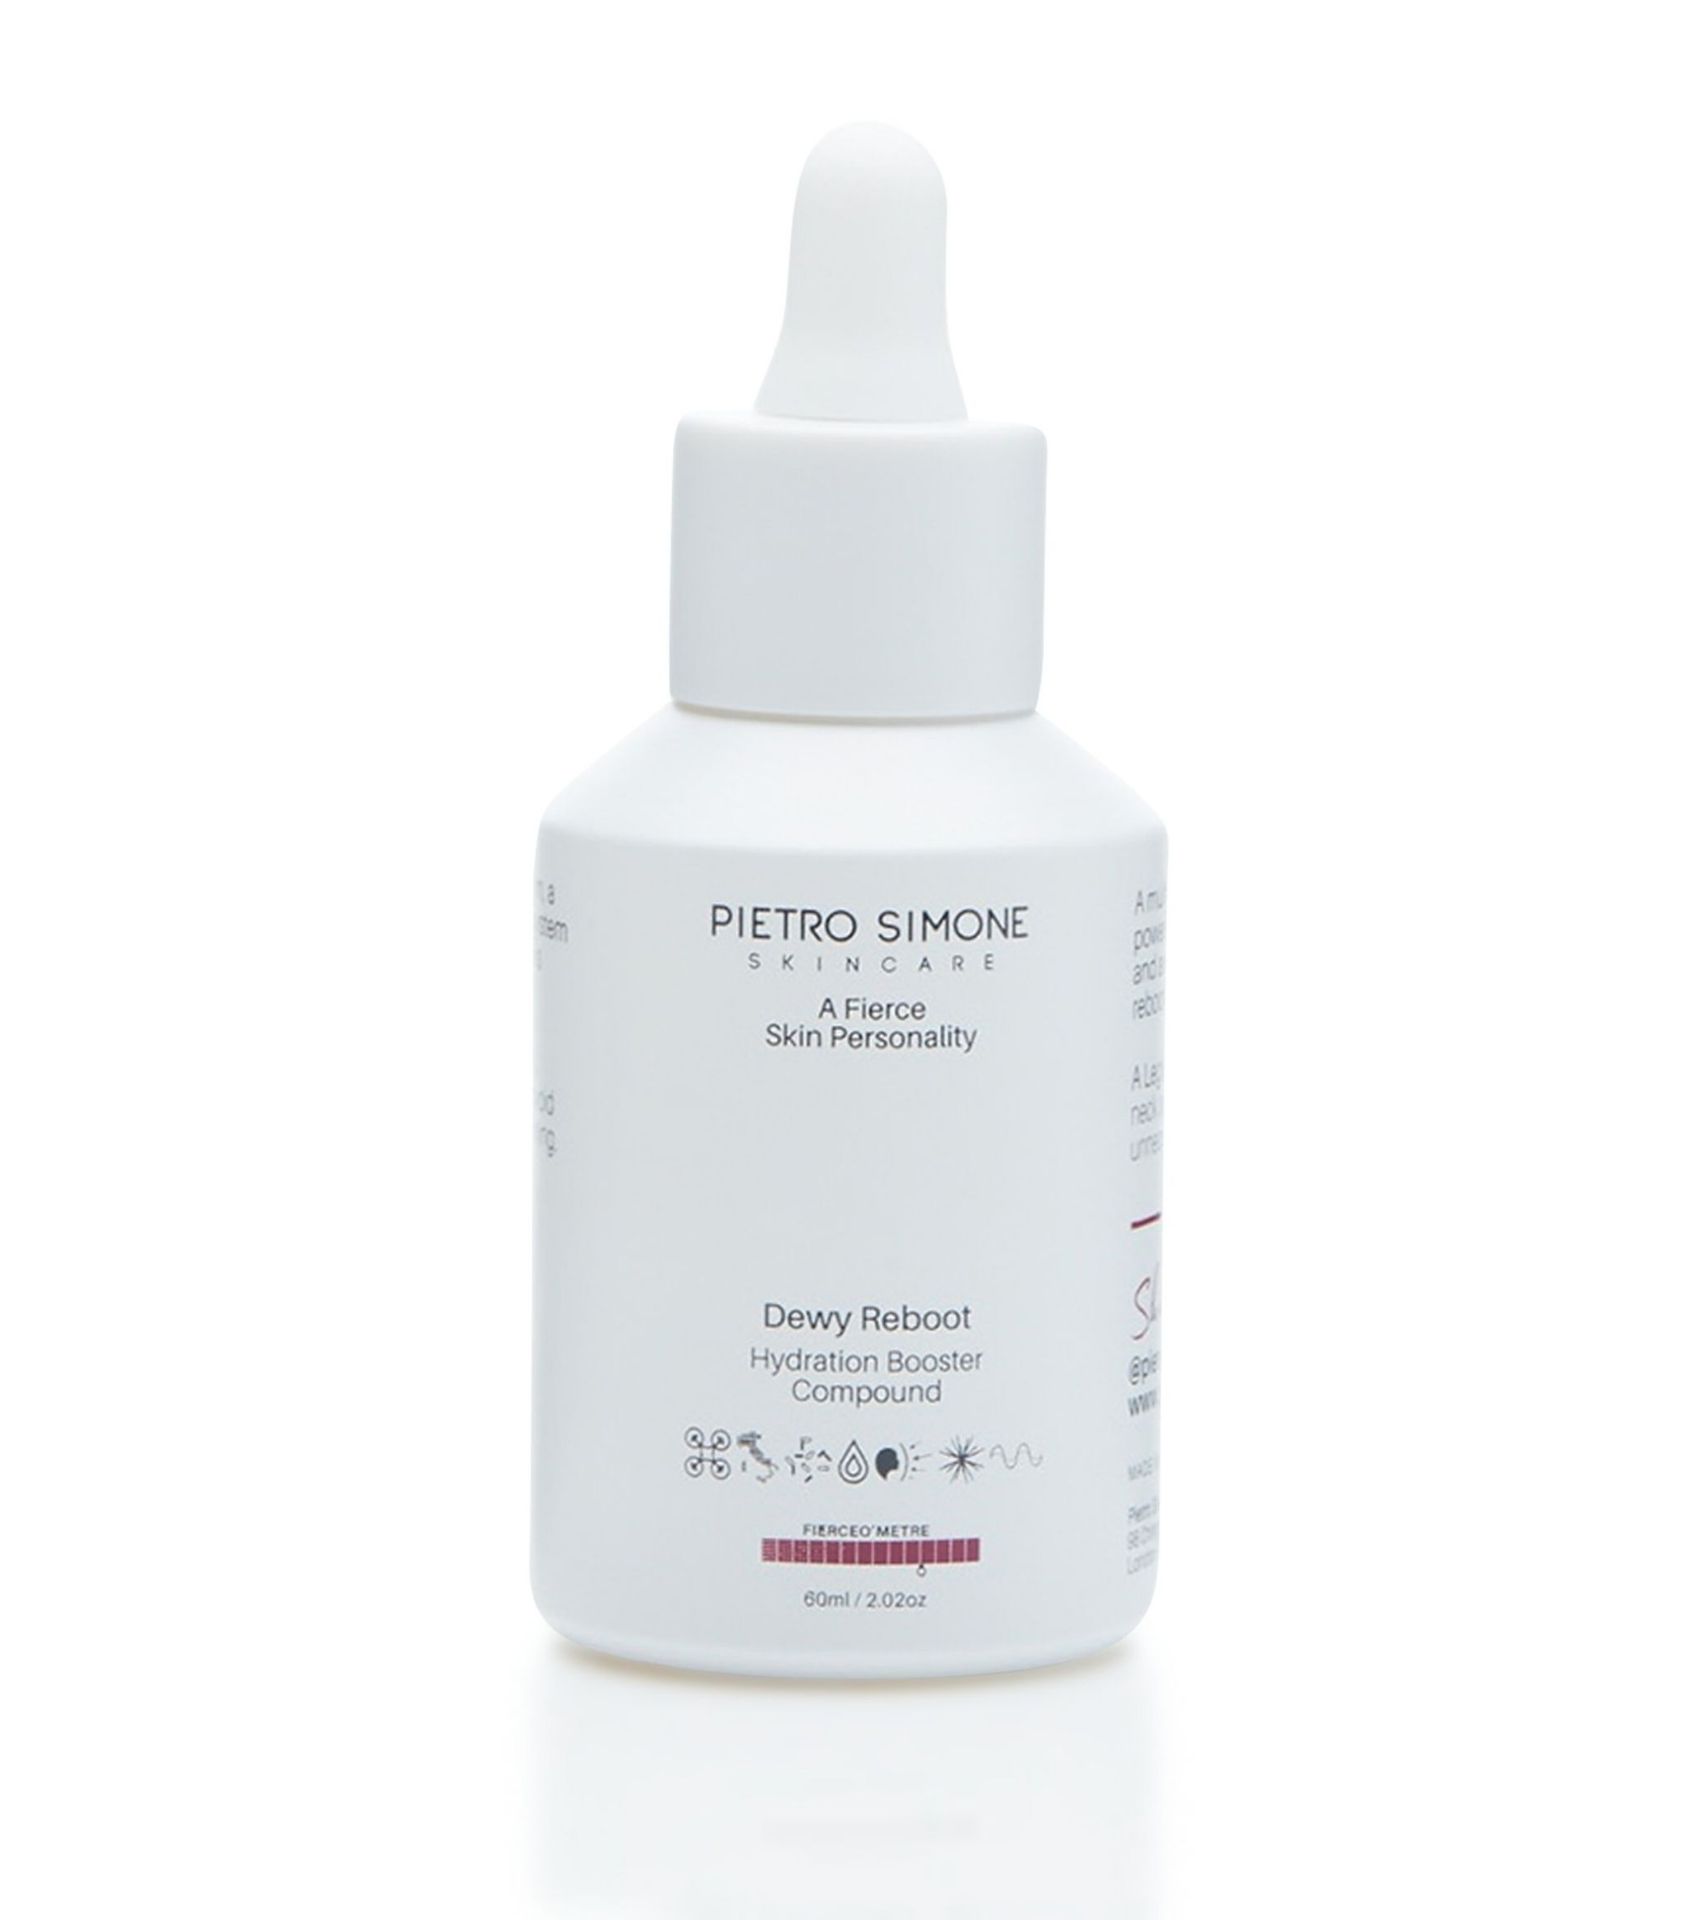 2x BRAND NEW PIETRO SIMONE The Fierce Collection Dewy Reboot 60ml. RRP £85 EACH. (OFC). A multi-